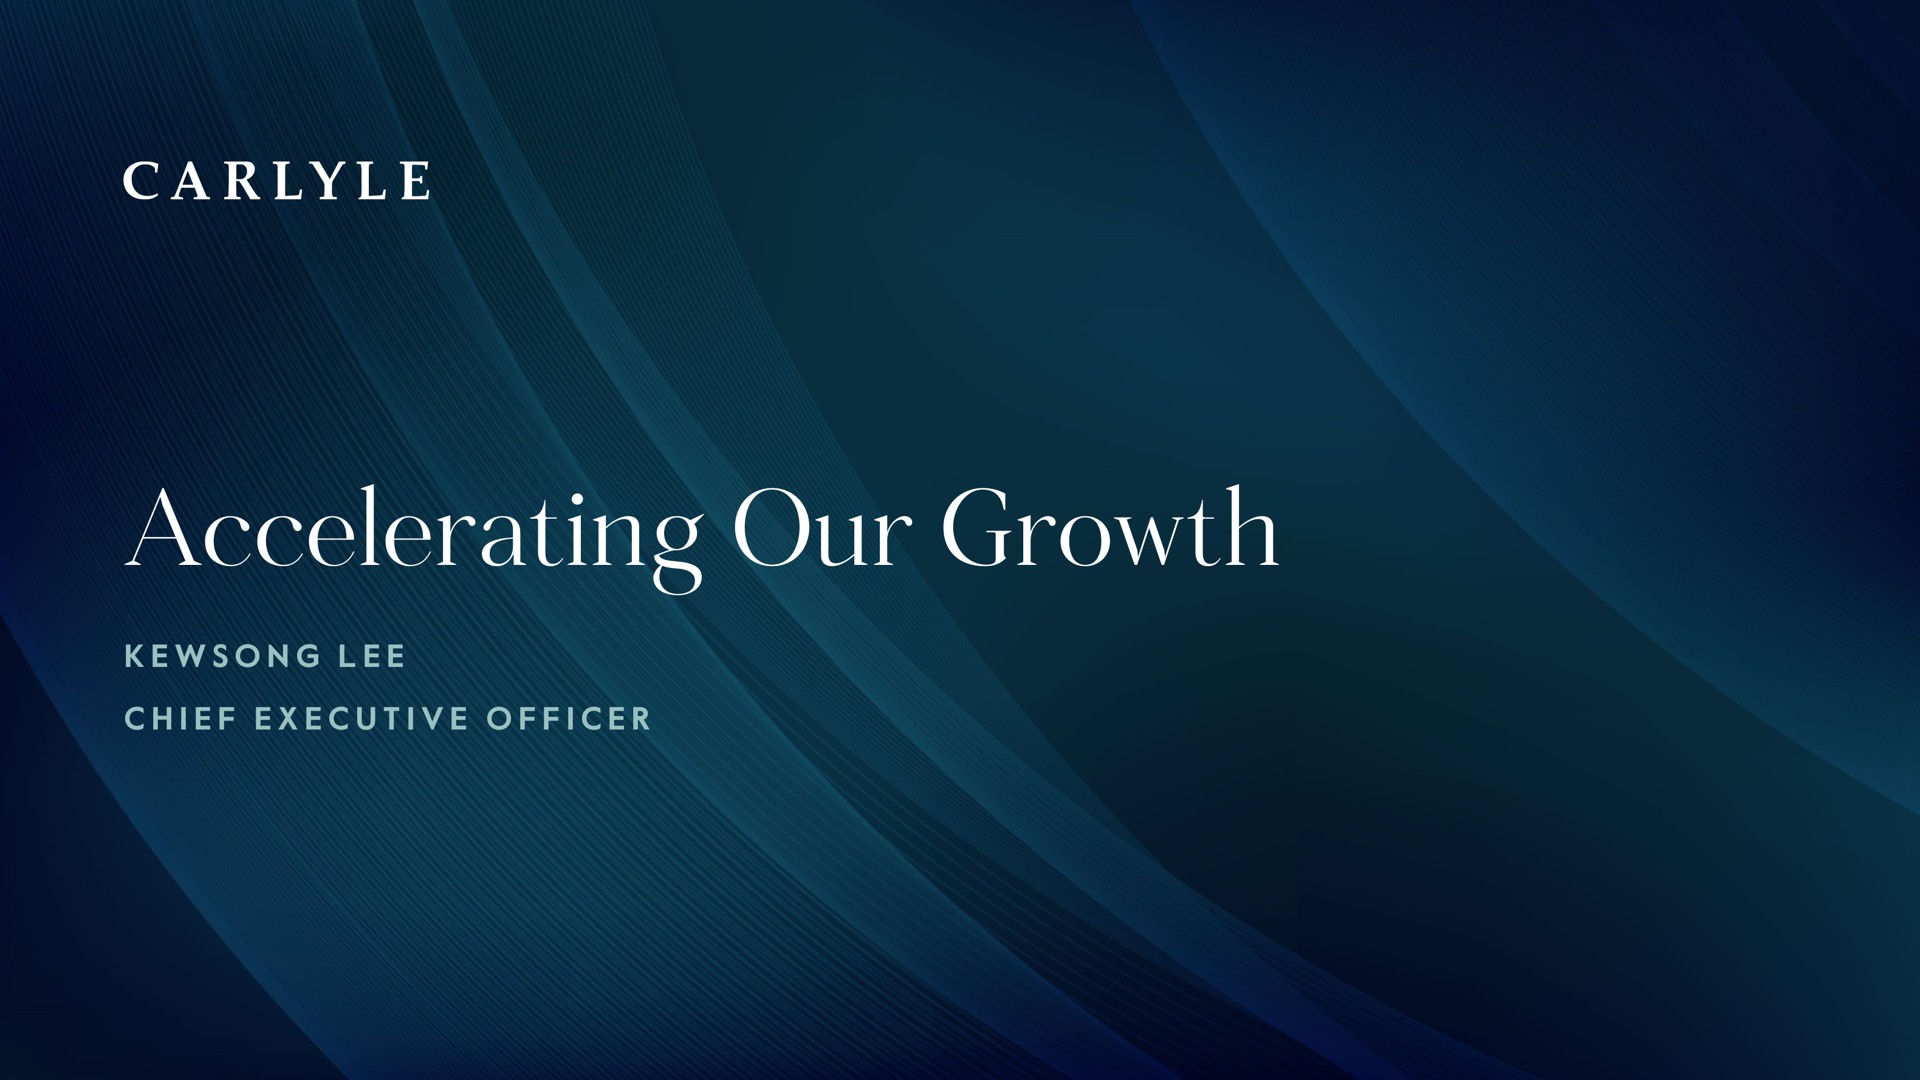 accelerating our growth | Carlyle